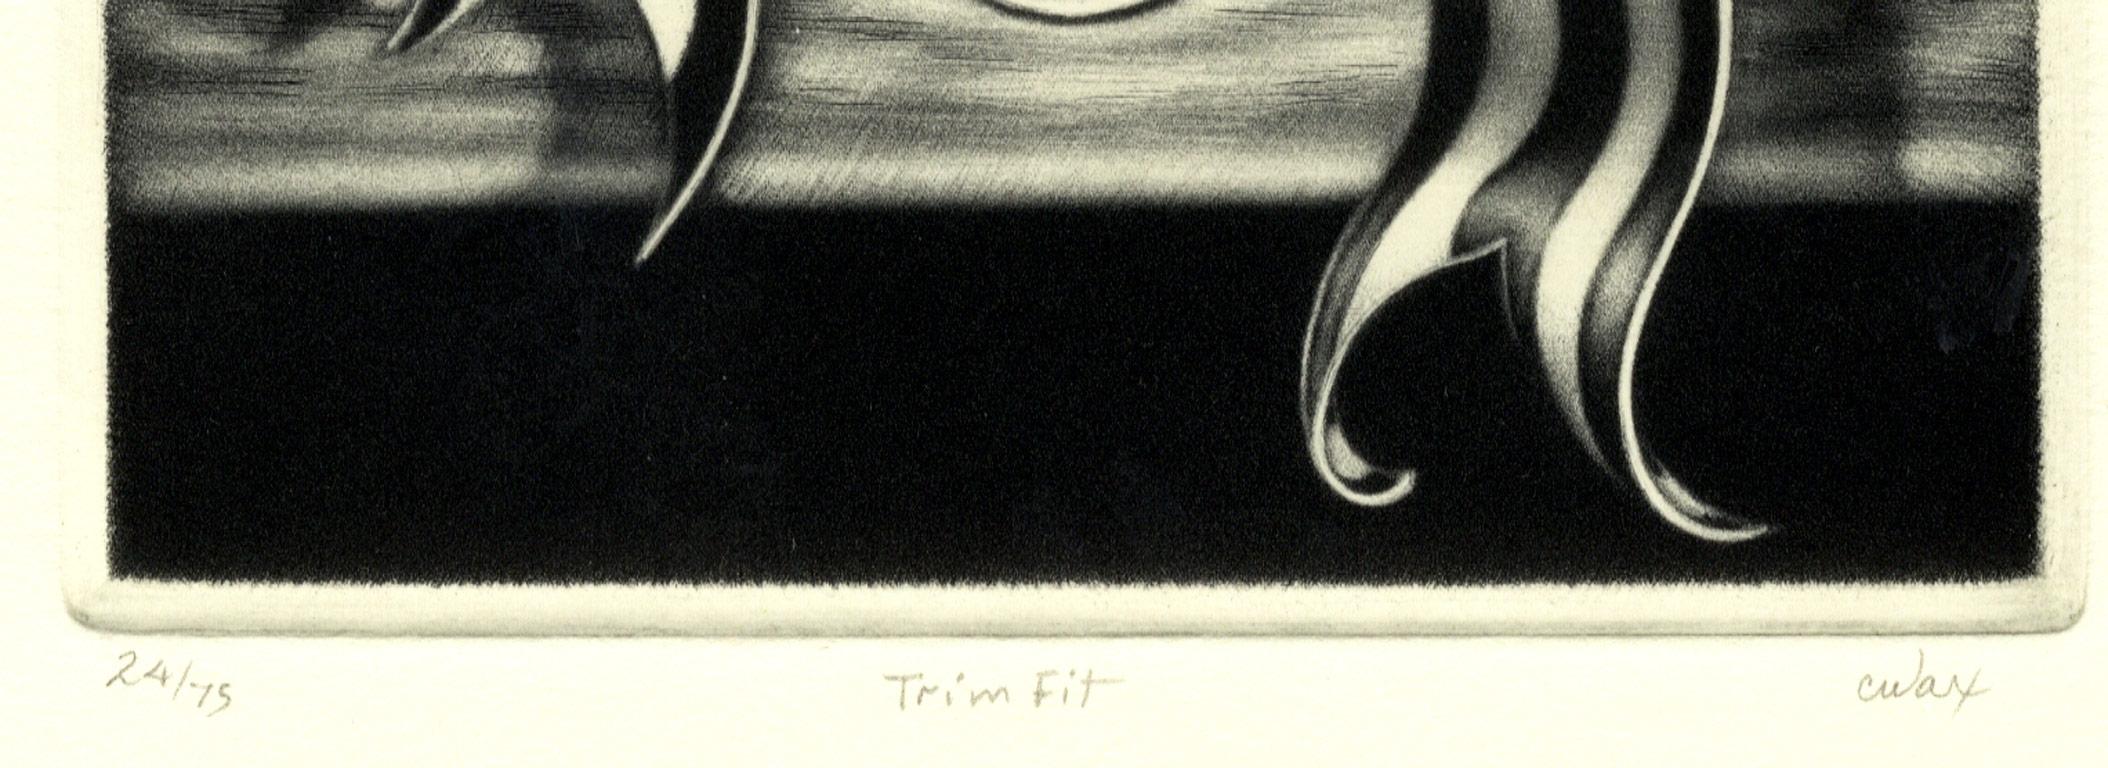 Trim Fit (Deconstructed Singer machine gives both steel and silk equal weight) - American Modern Print by Carol Wax